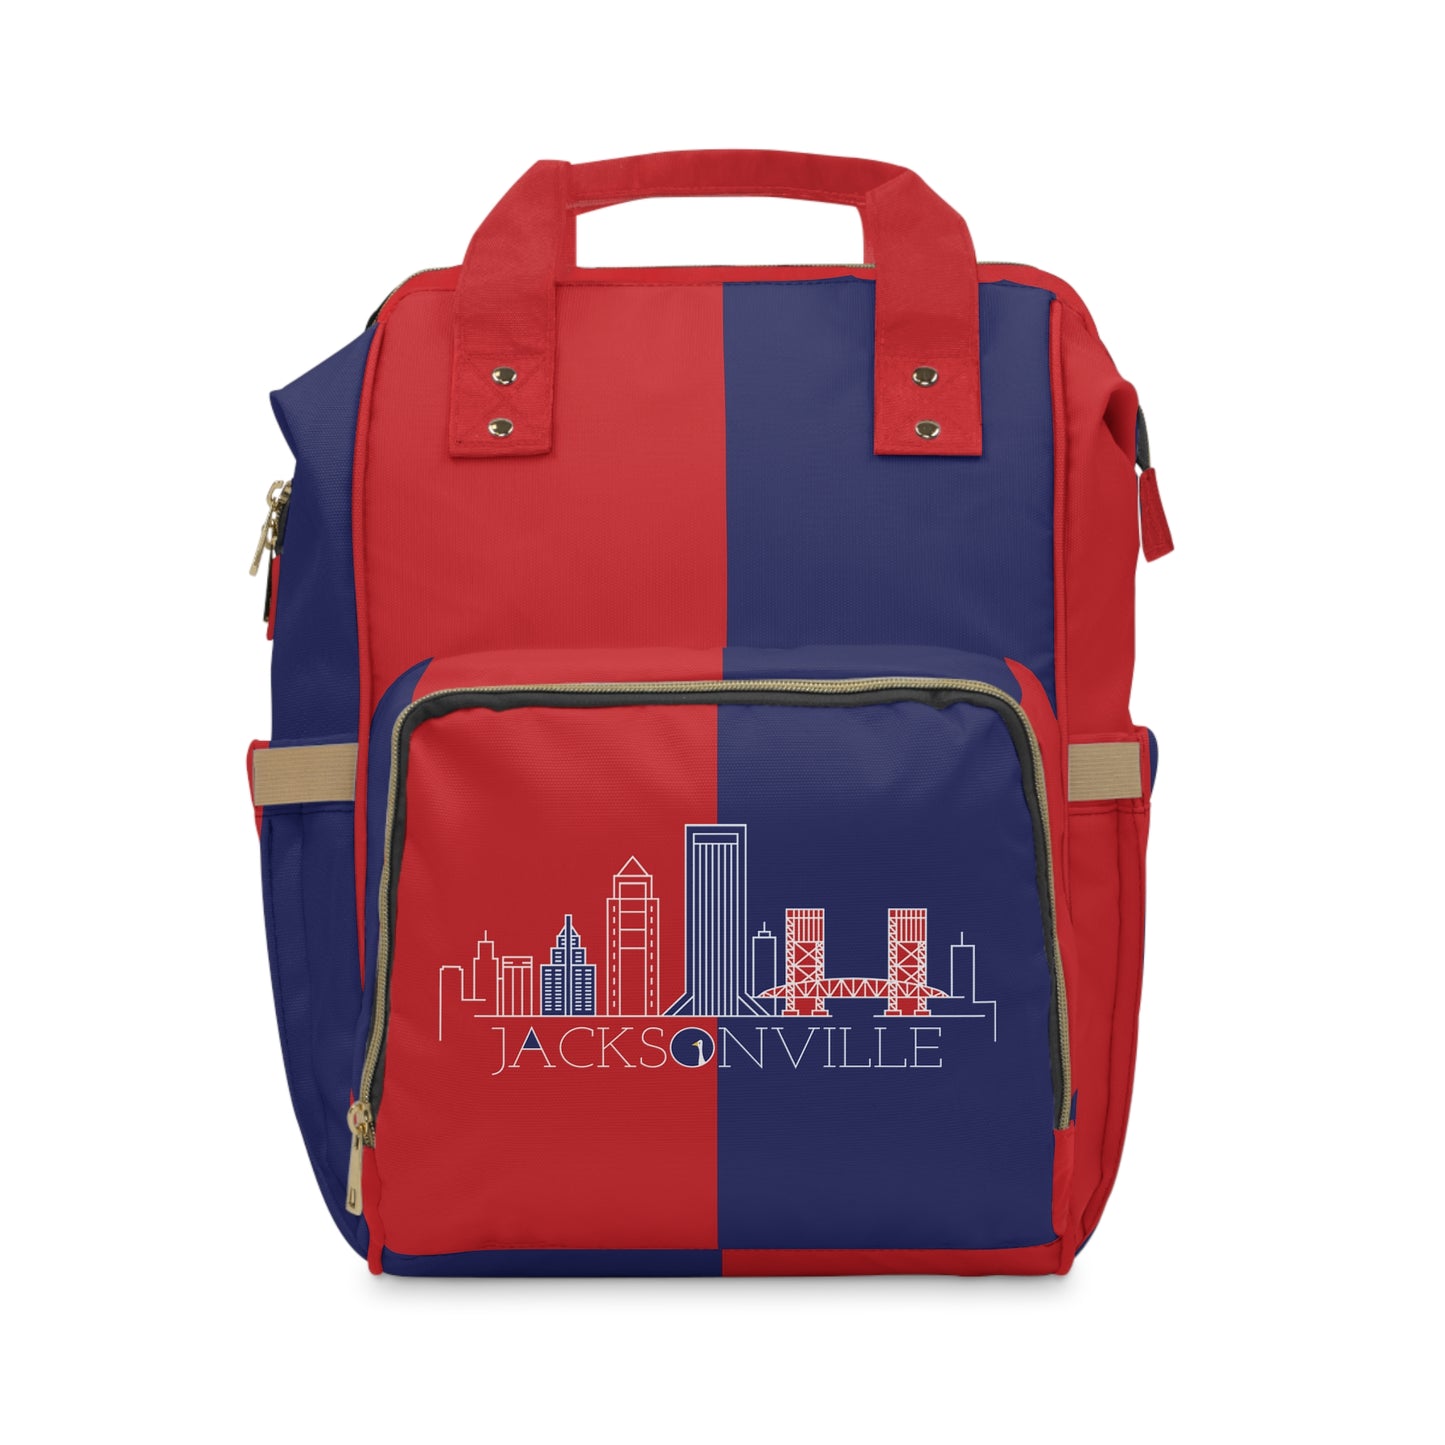 Jacksonville - Red White and Blue City series - Multifunctional Diaper Backpack